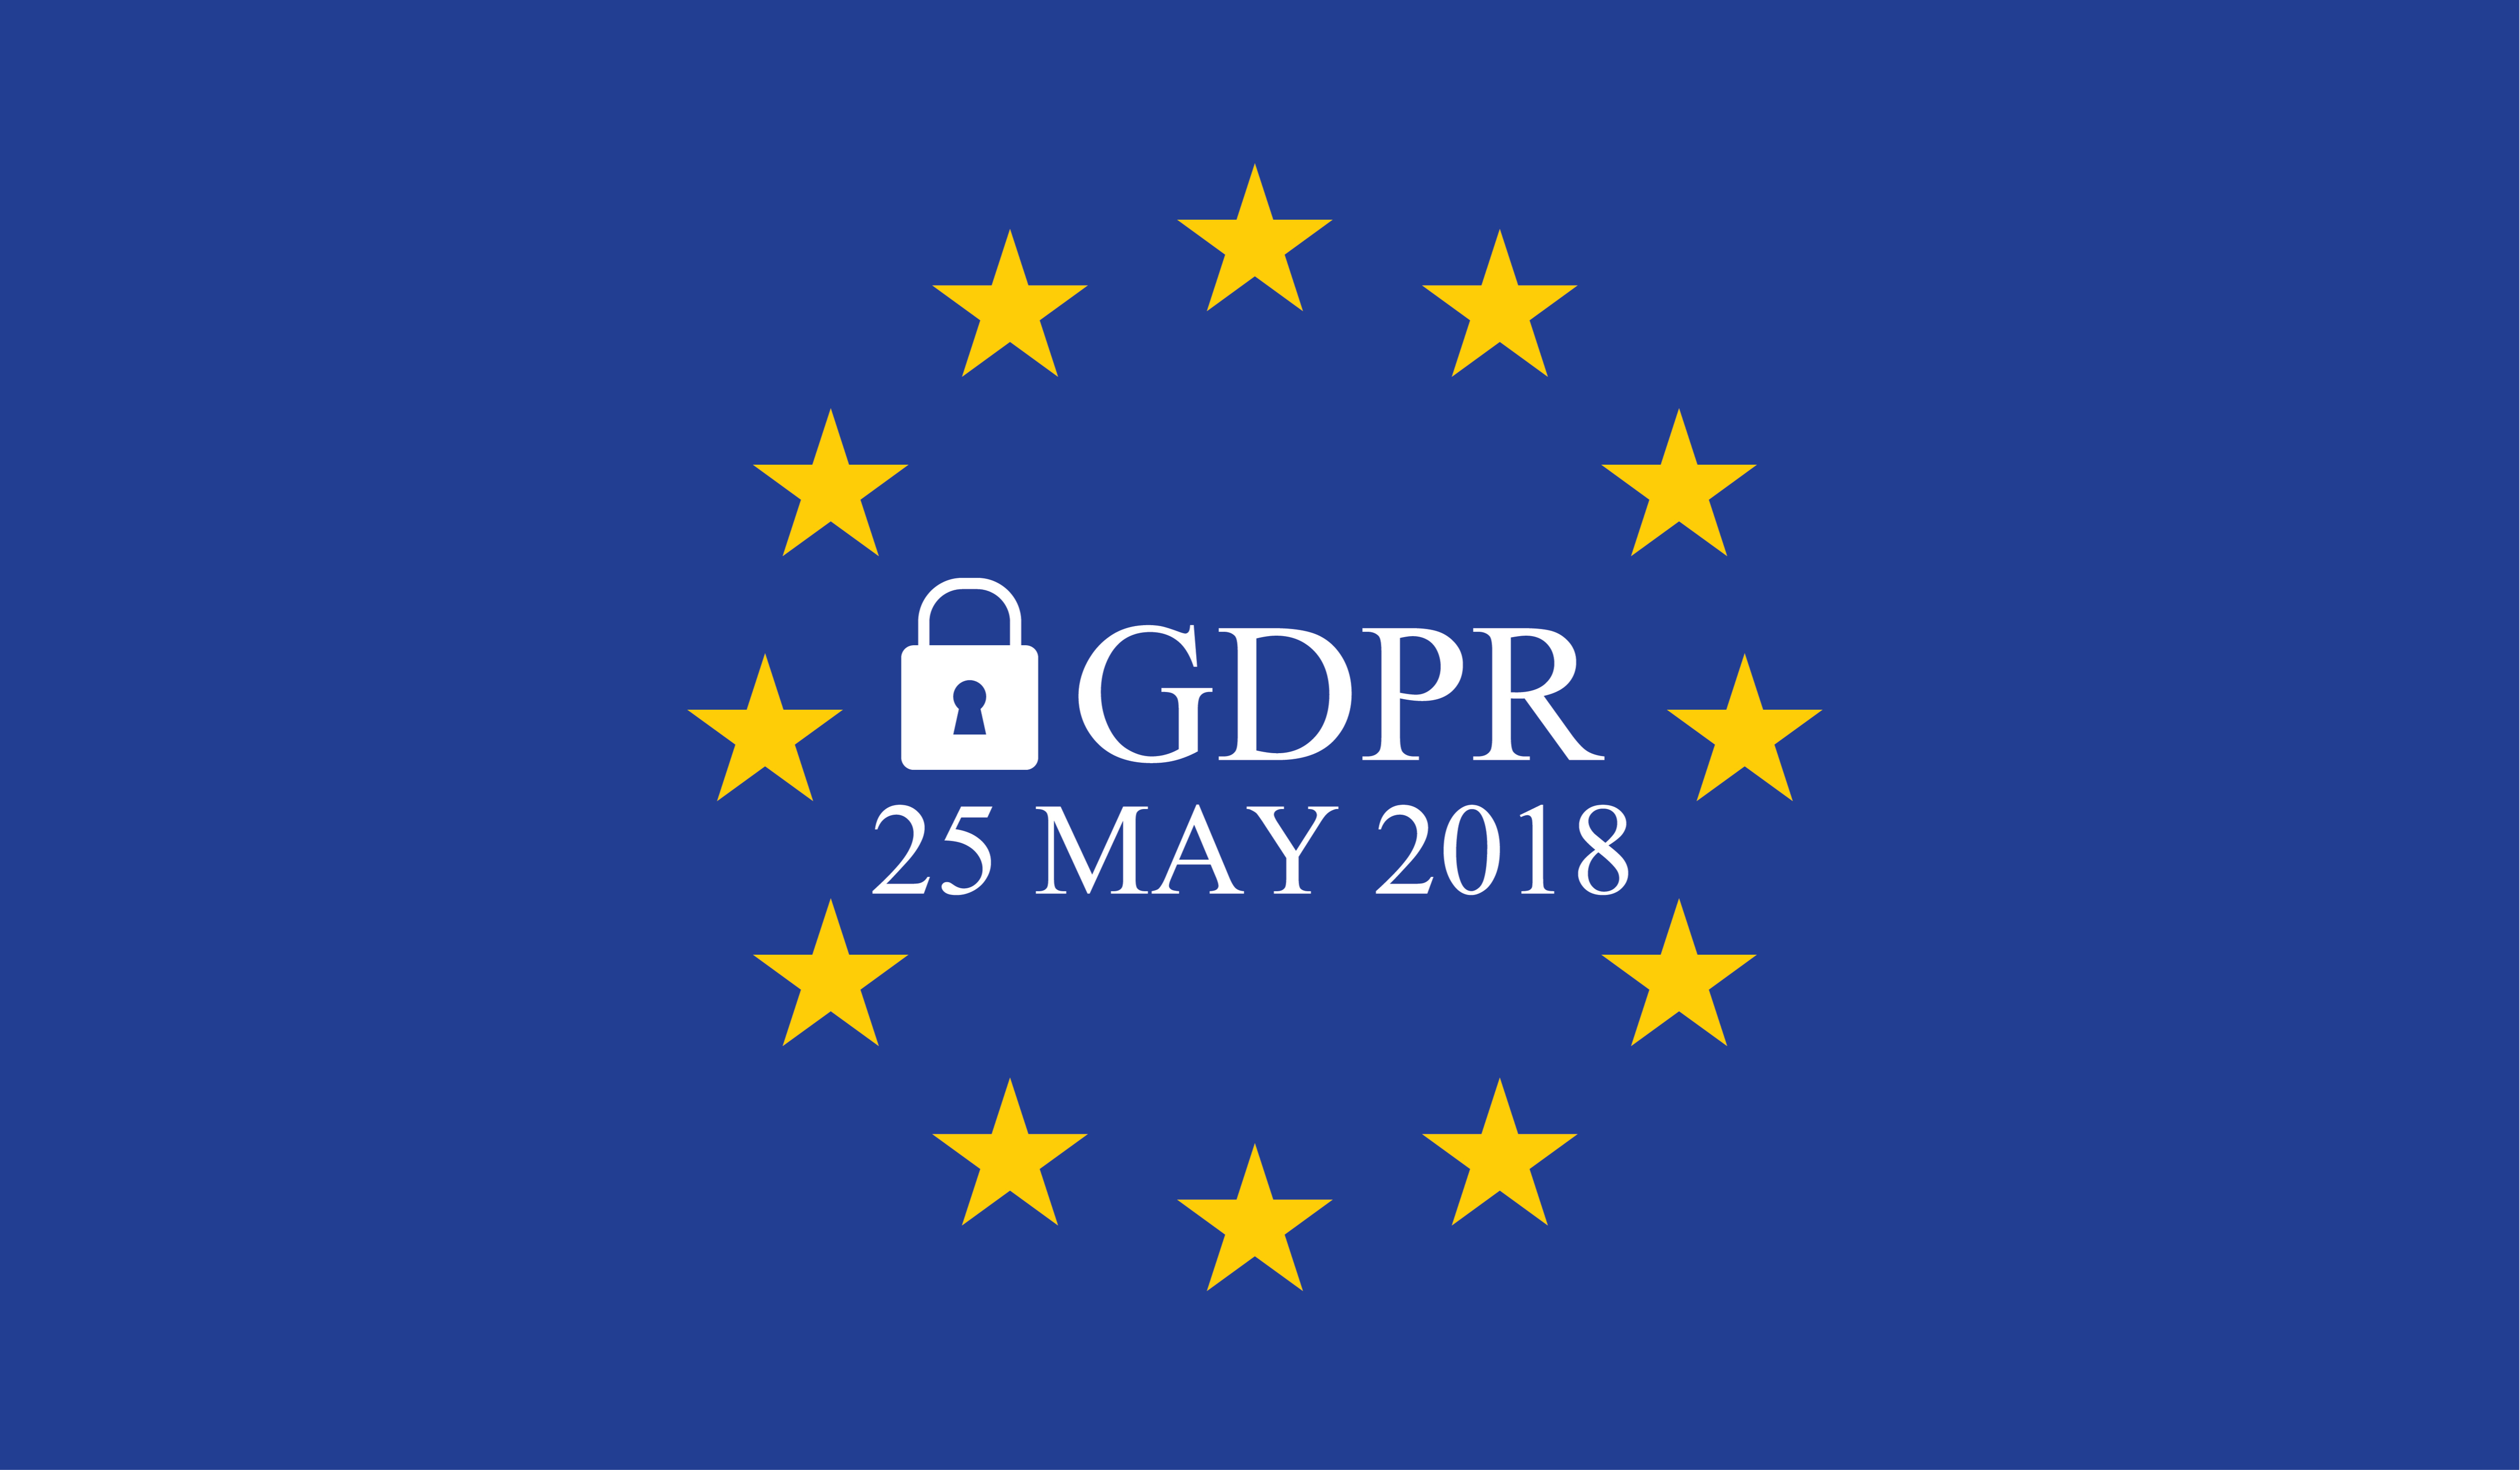 GDPR: Are you Ready?